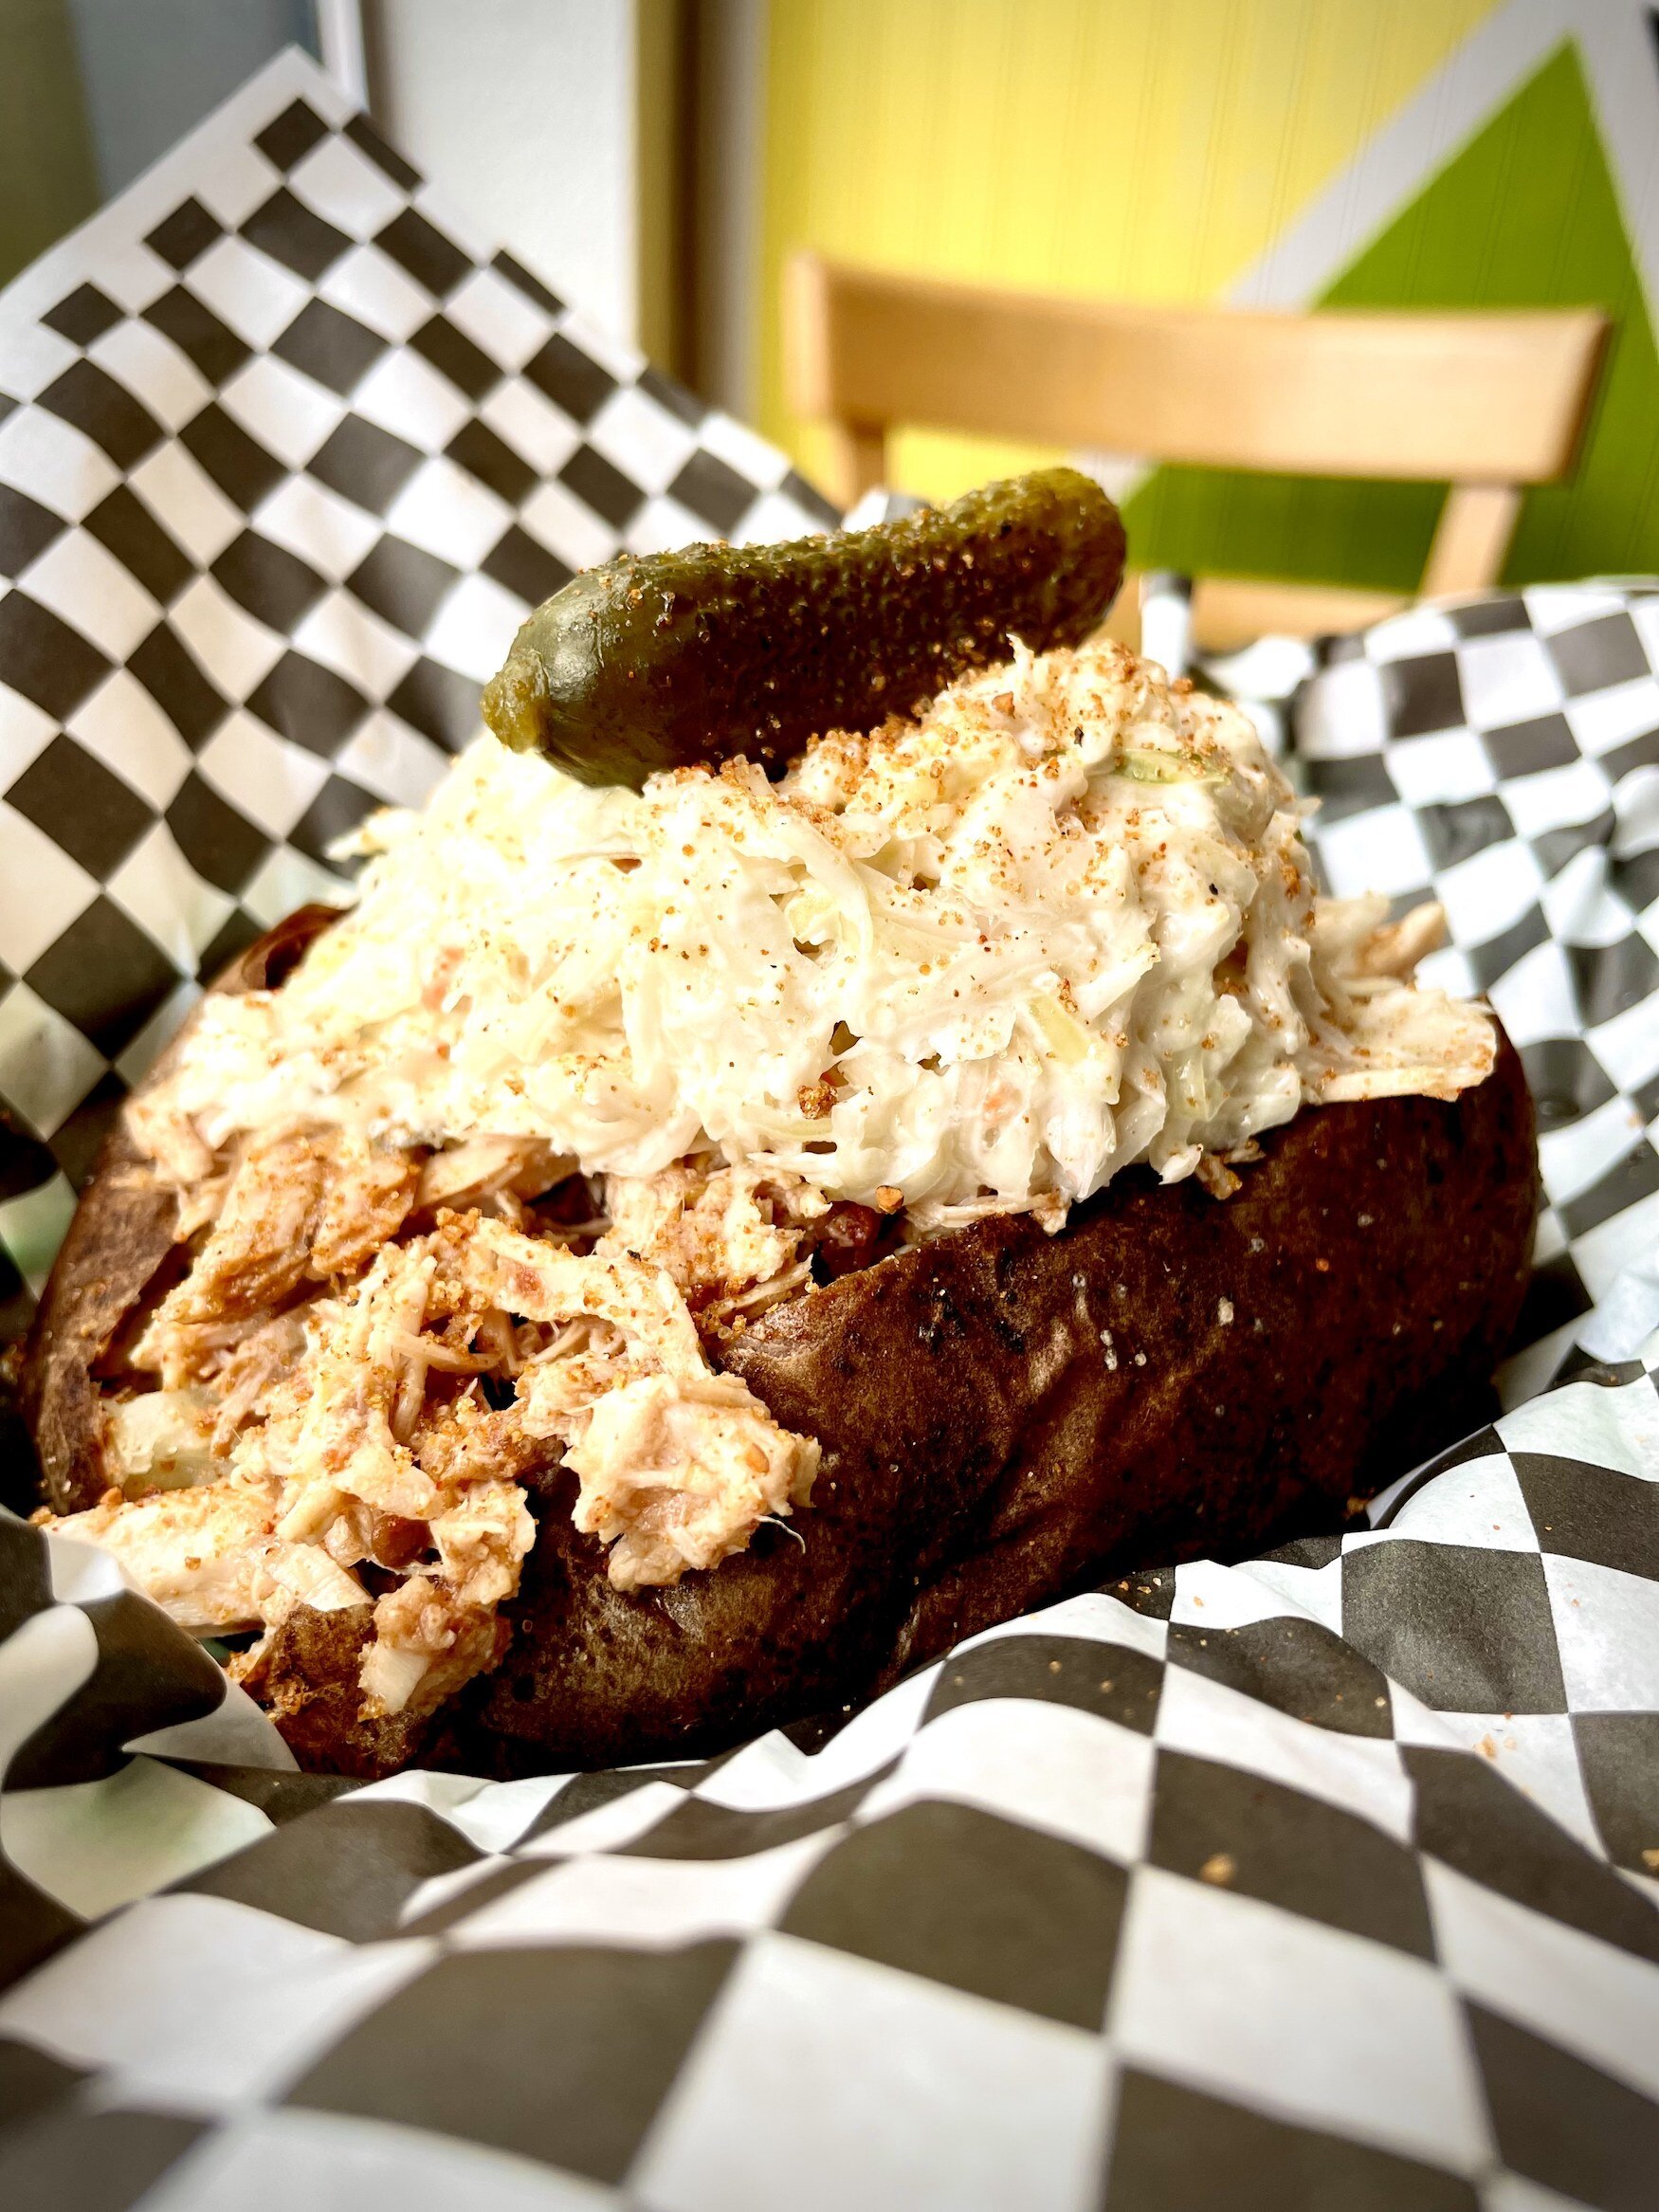 The Memphis Pork Potato topped with Memphis-style pulled pork, coleslaw, a pickle, and house seasoning